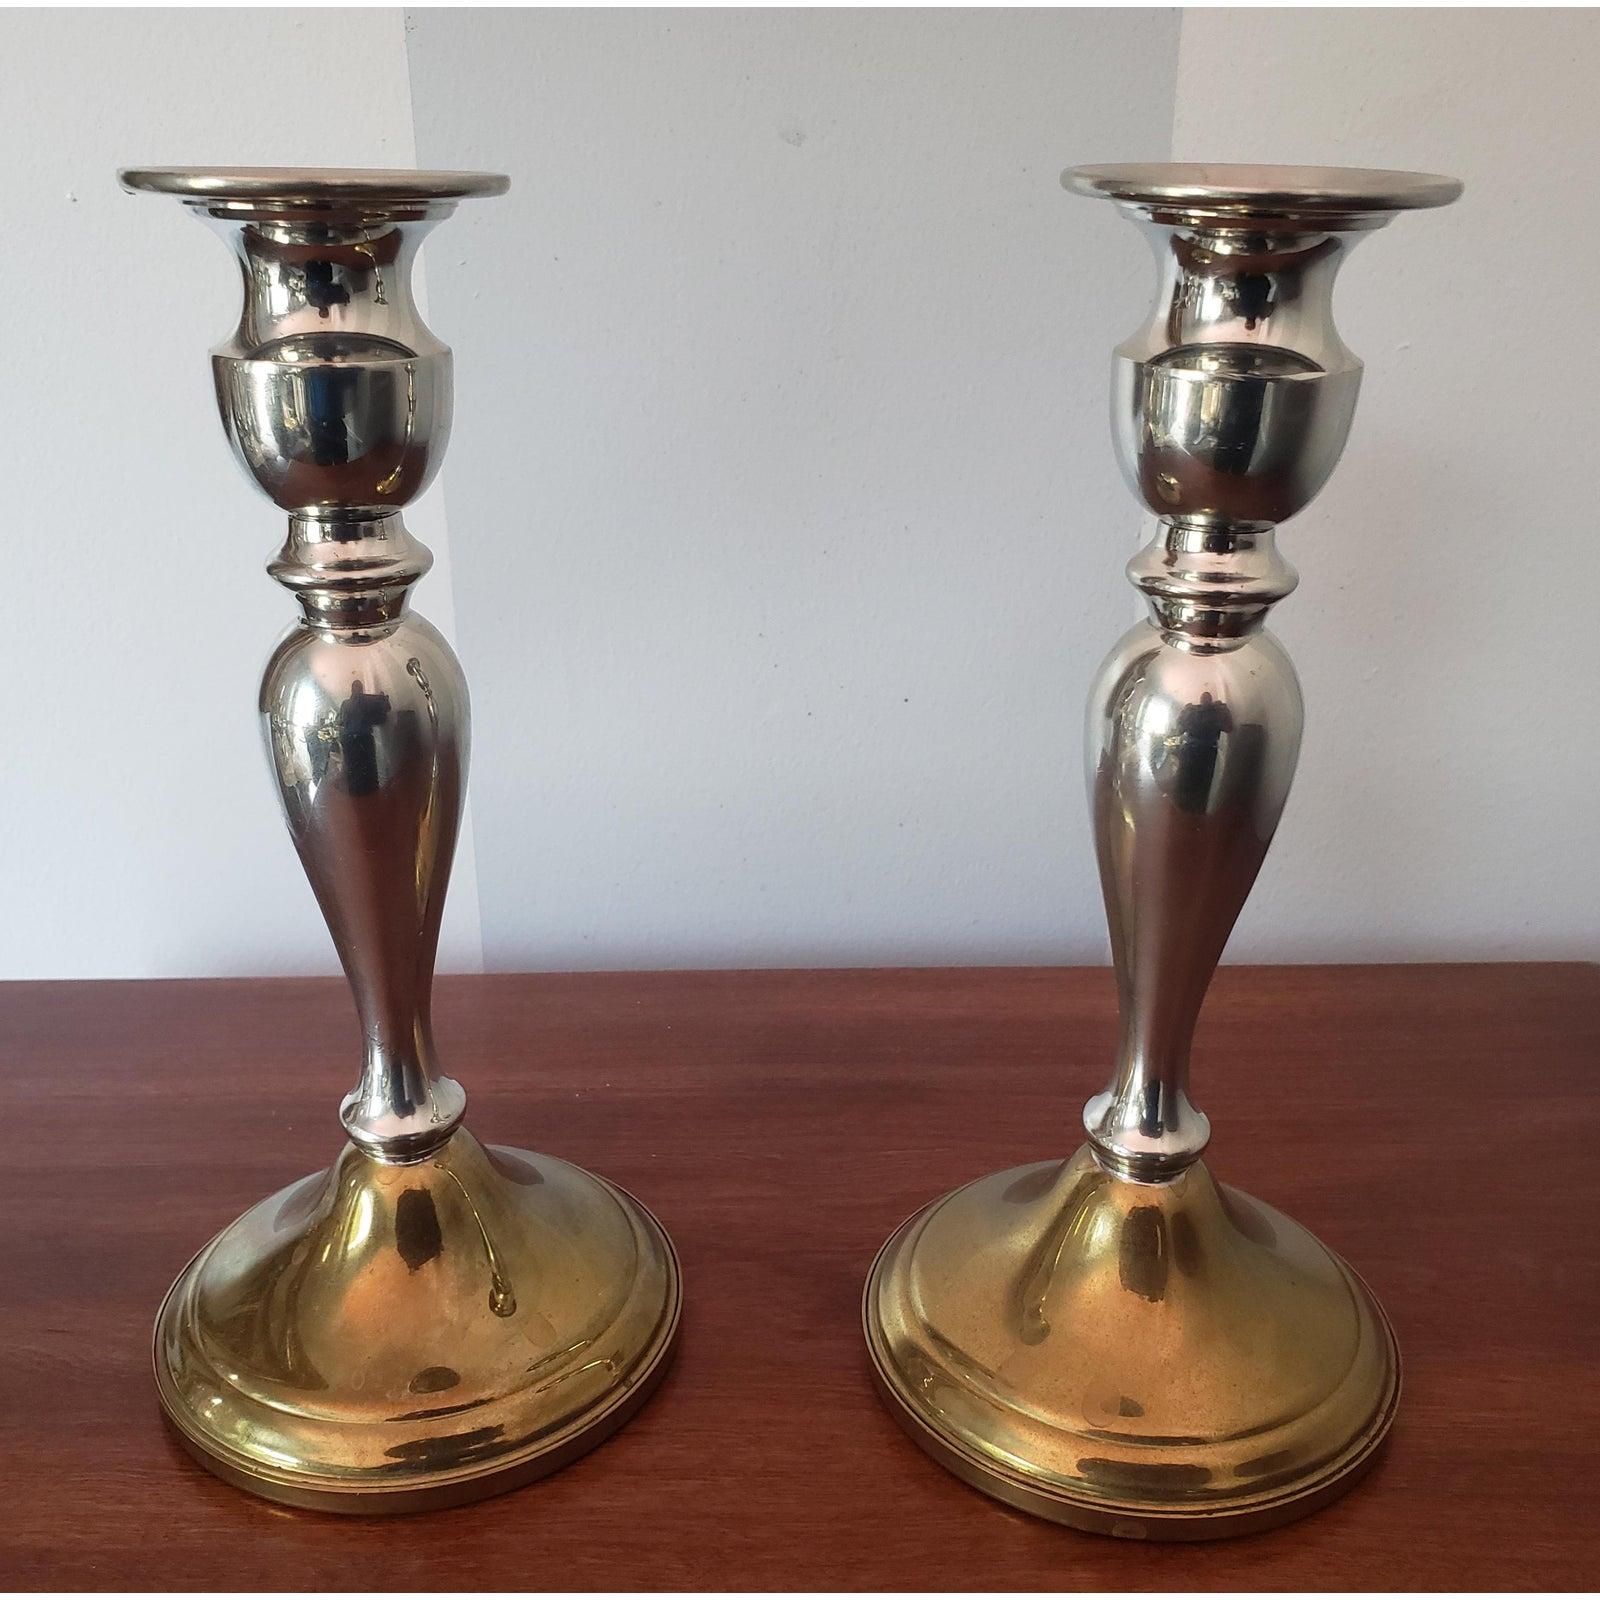 Pair of 1960s weighted web pewter candle holders. 
Dual silver and brass tone. 
Very Good condition. Measure 4